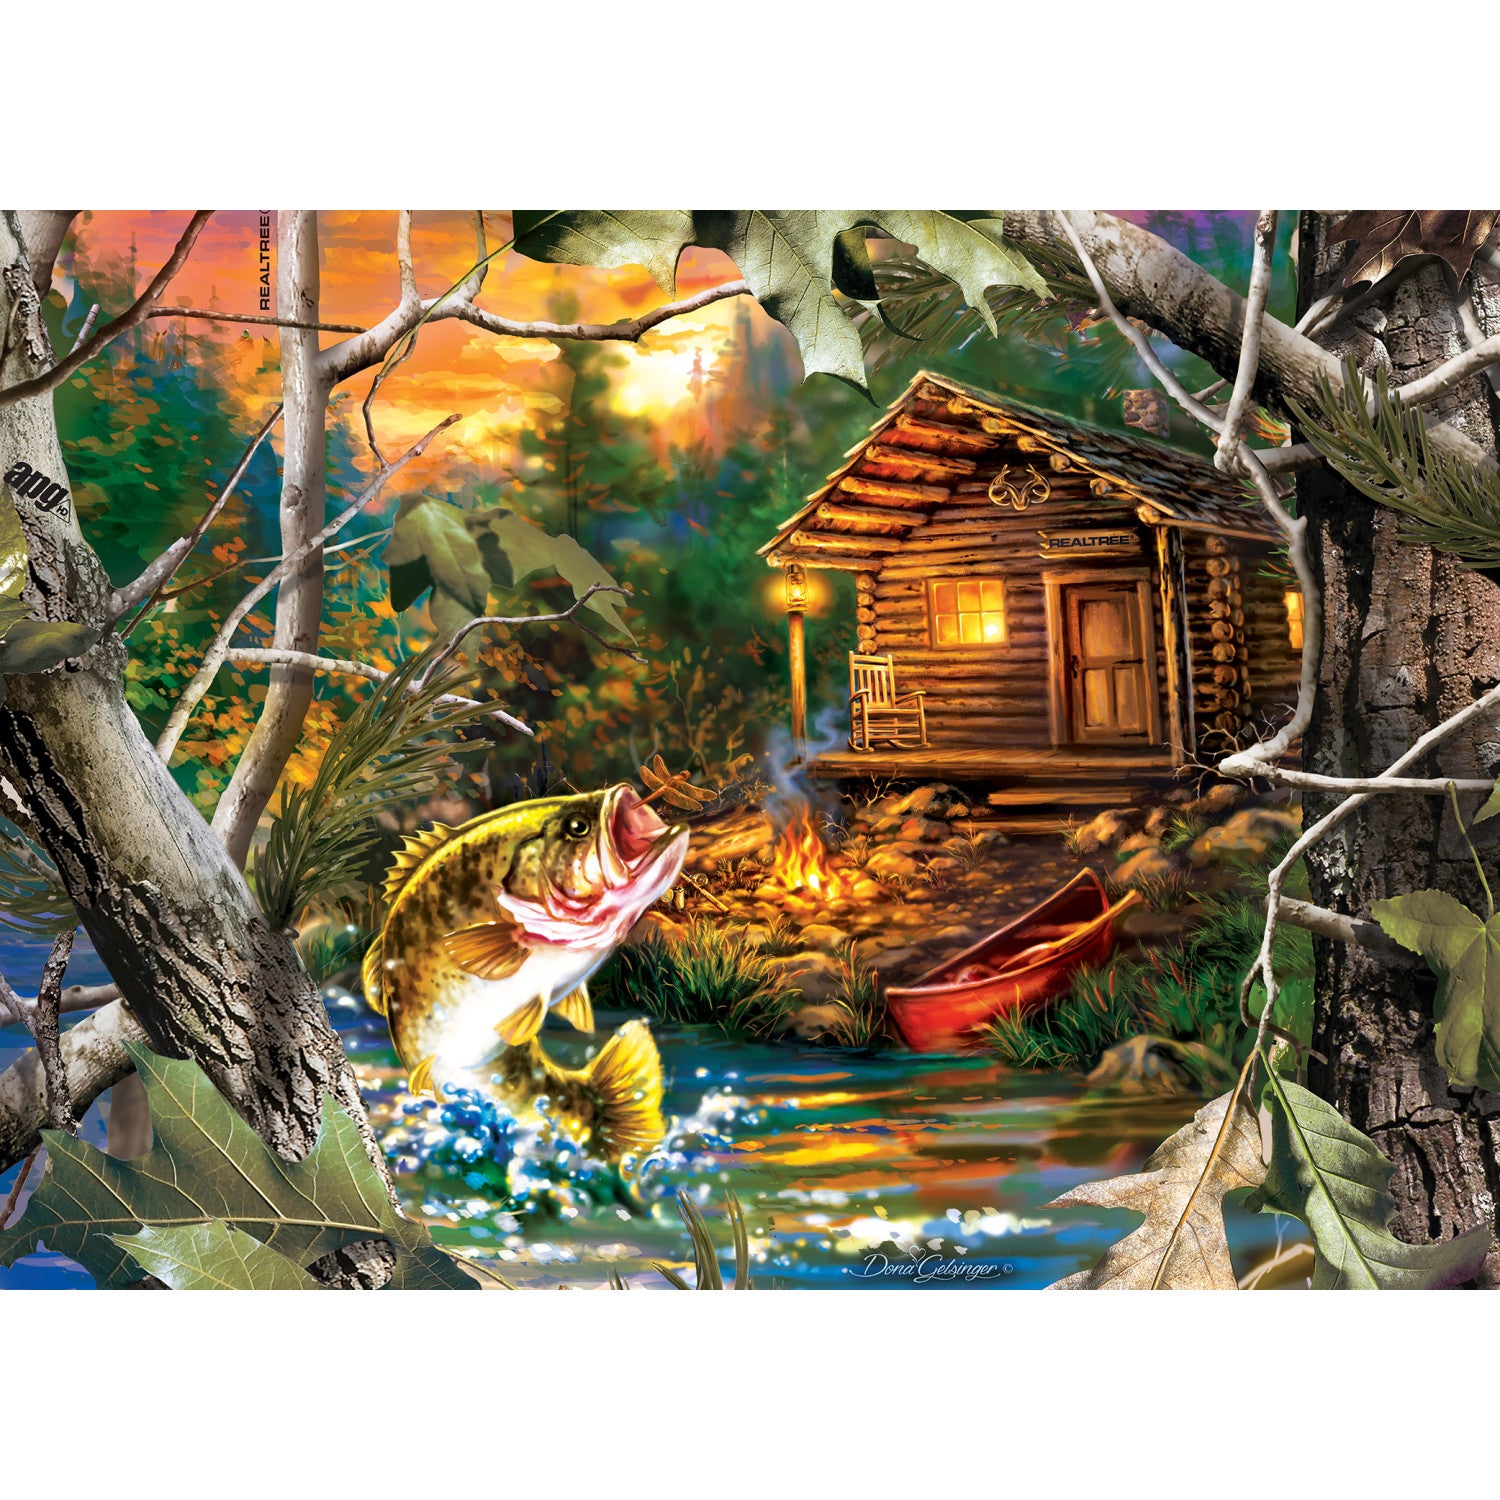 Realtree - The One That Got Away 1000 Piece Puzzle